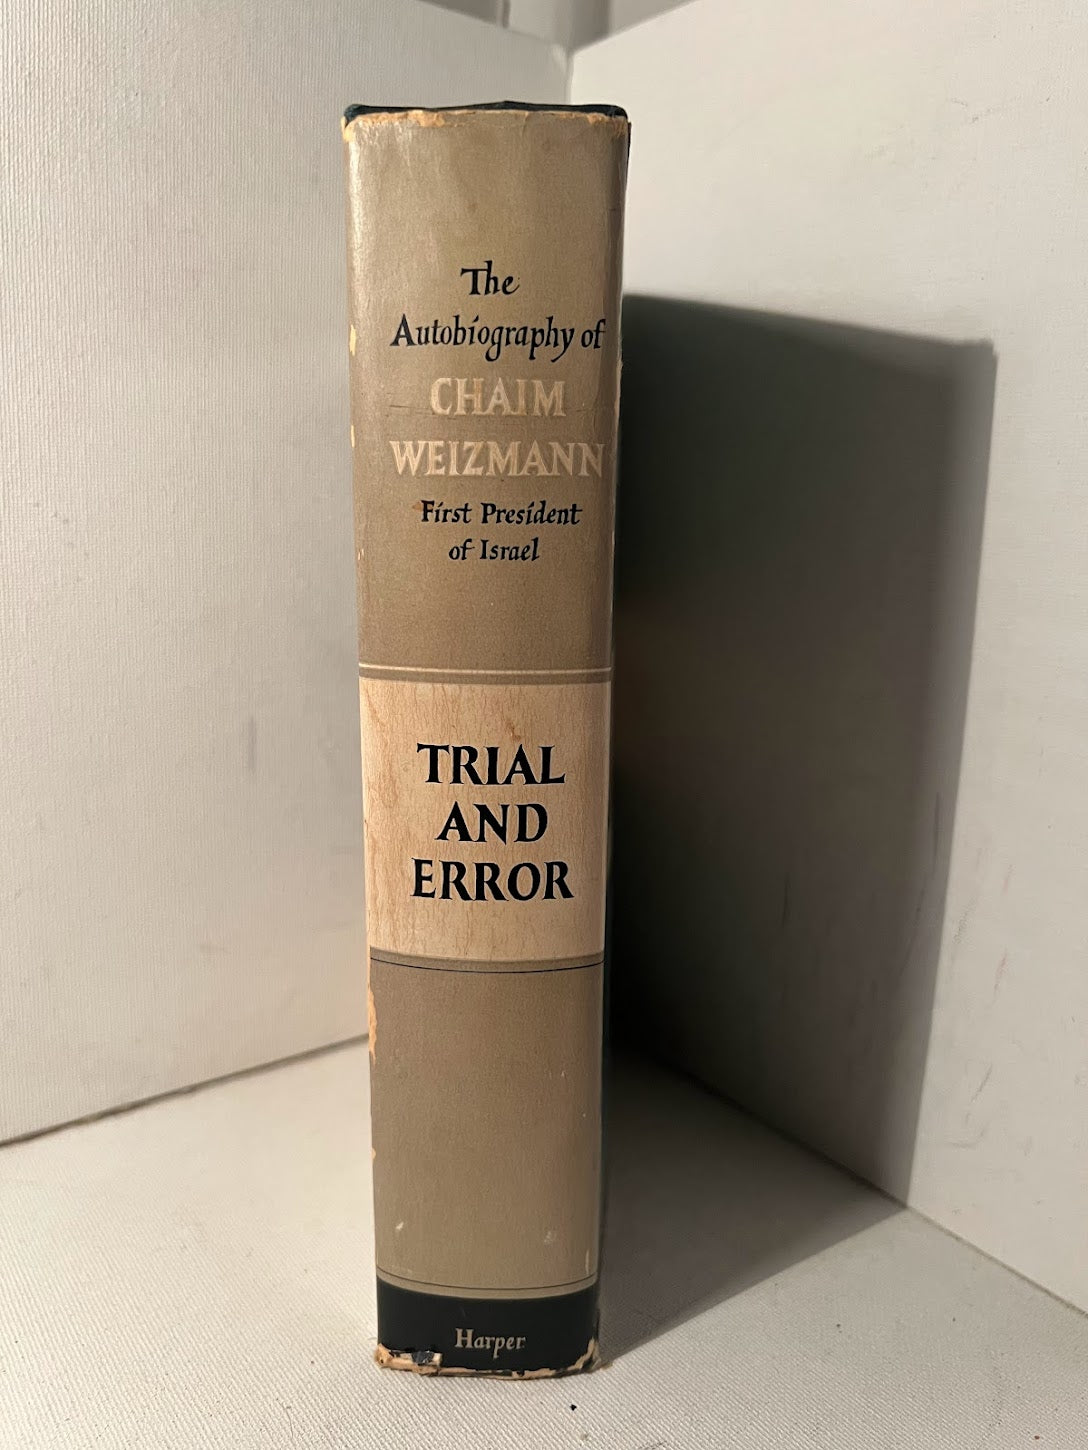 Trial and Error: The Autobiography of Chaim Weizmann